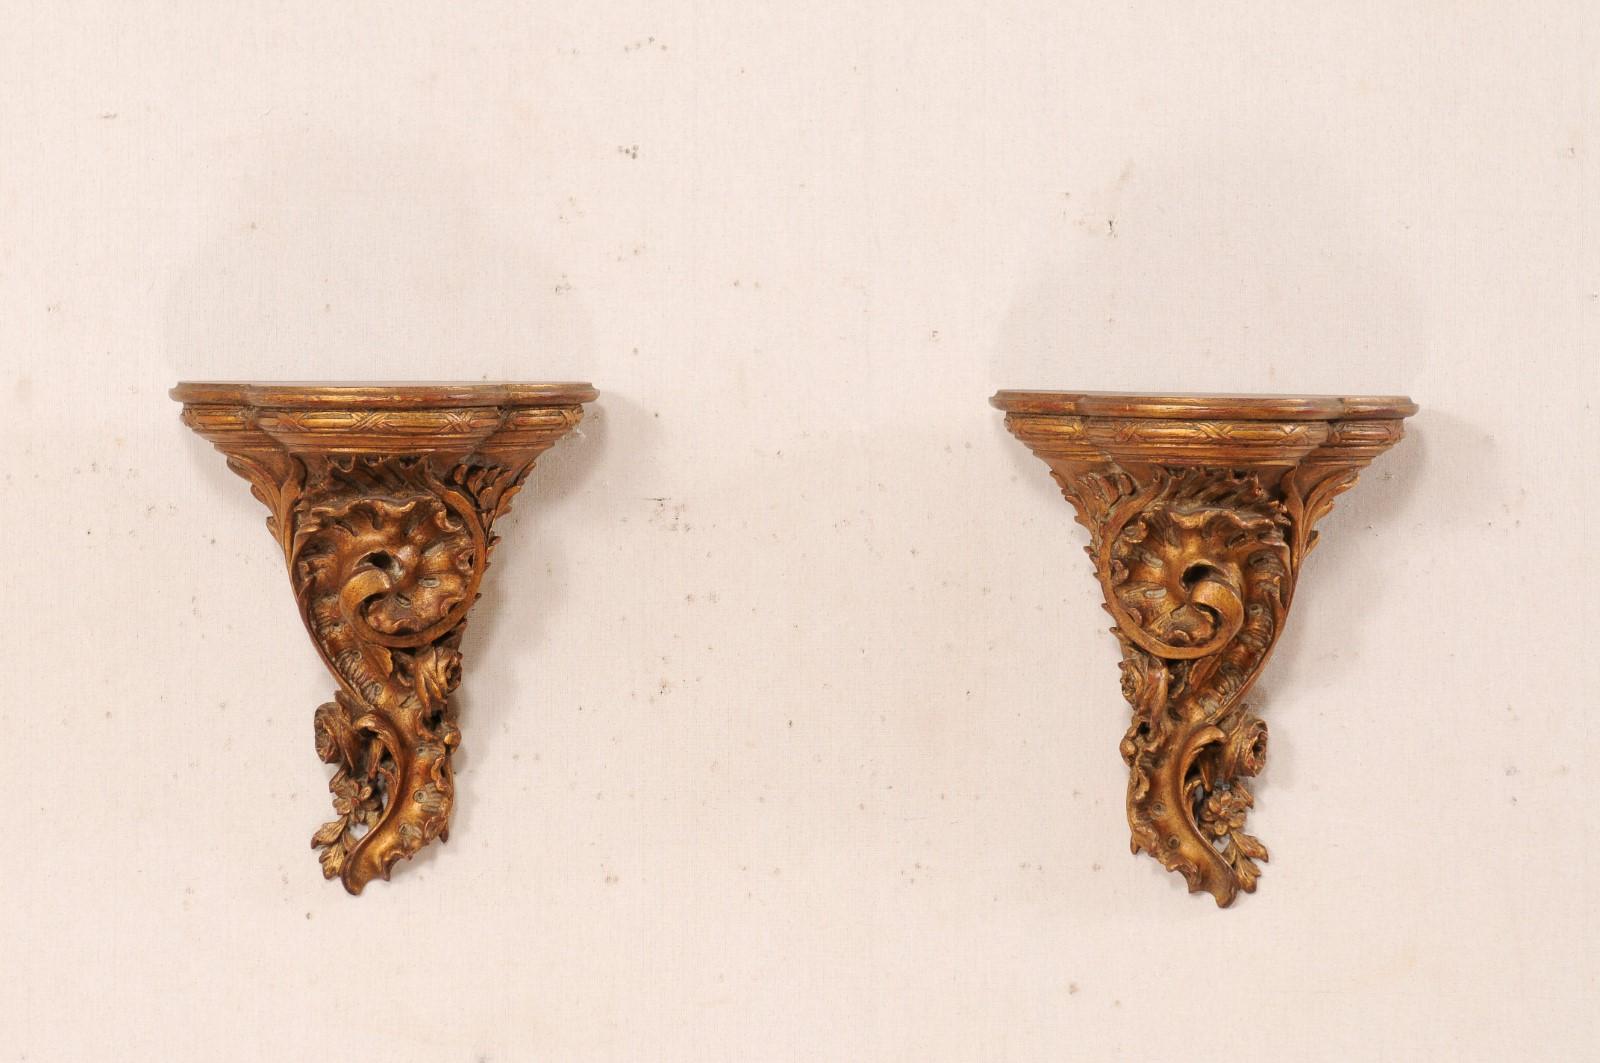 An Italian pair of carved-wood decorative wall shelves from the mid 20th century. These vintage shelves from Italy have been hand carved, in a swirling leaf motif. The shelf top has a rounded and molded edge, with curvy bowed front, and flat